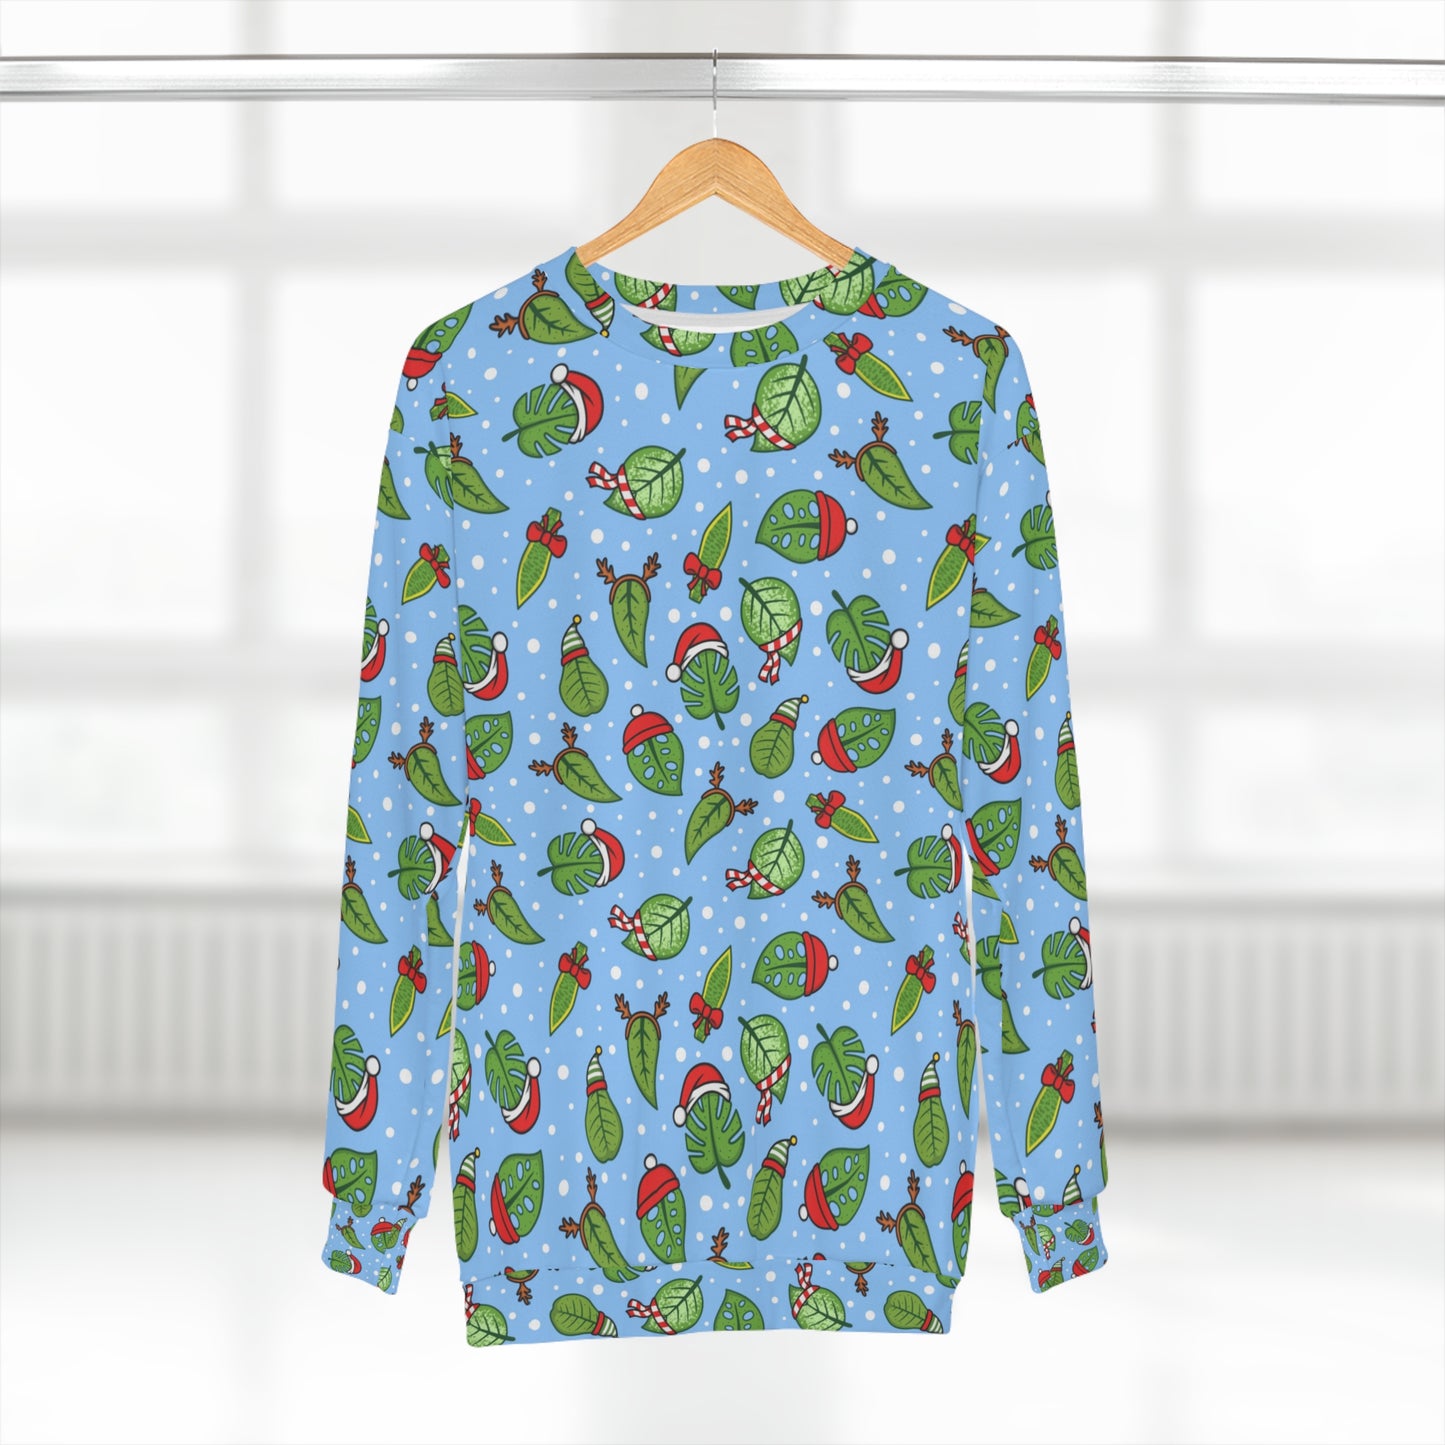 Christmas ugly sweater for plant lovers, Sweatshirt with houseplants leaves and Christmas decorations for holidays season.